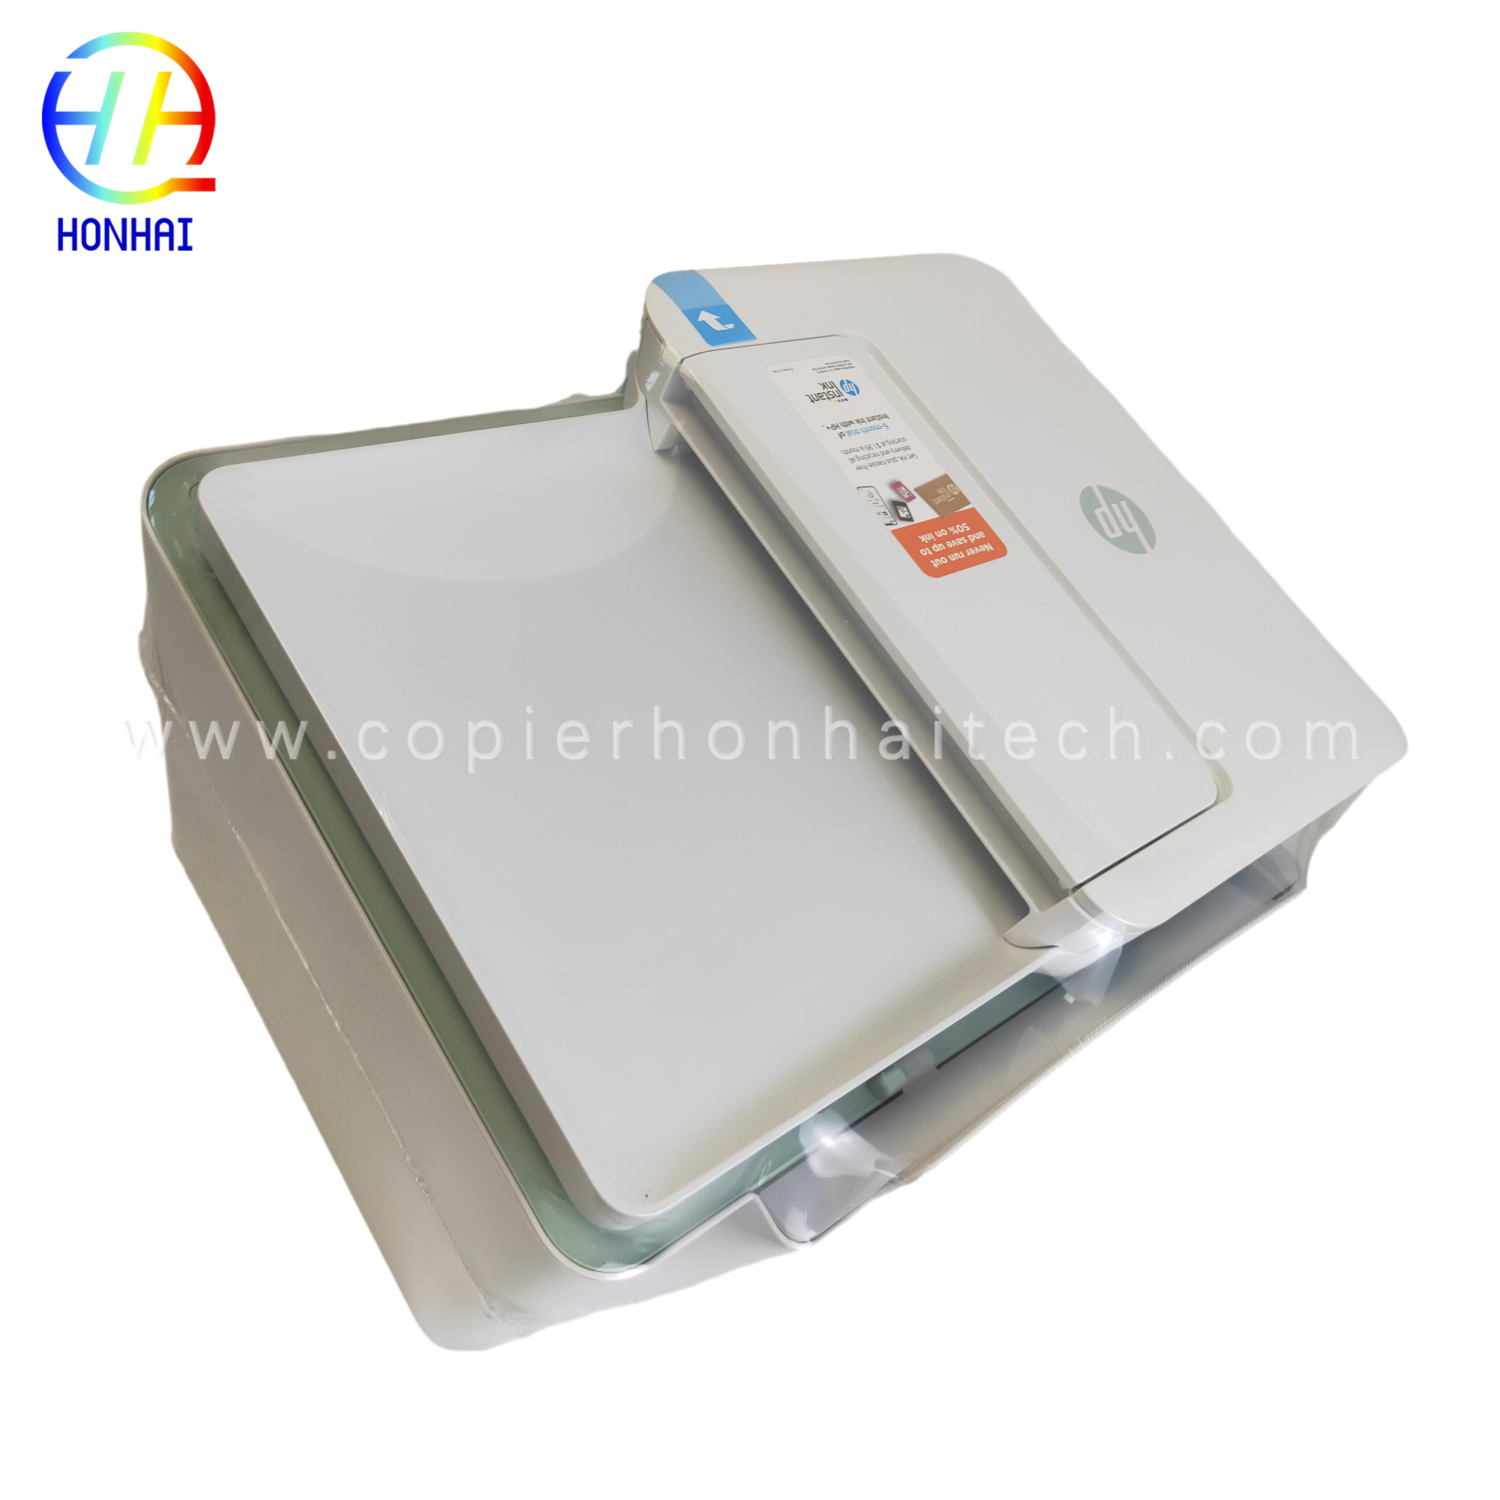 https://www.copierhonhaitech.com/original-new-wireless-printer-for-hp-deskjet-4122e-all-in-one-printer-scan-and-copy-home-office-students-and-home- pencetak-26q96a-produk/